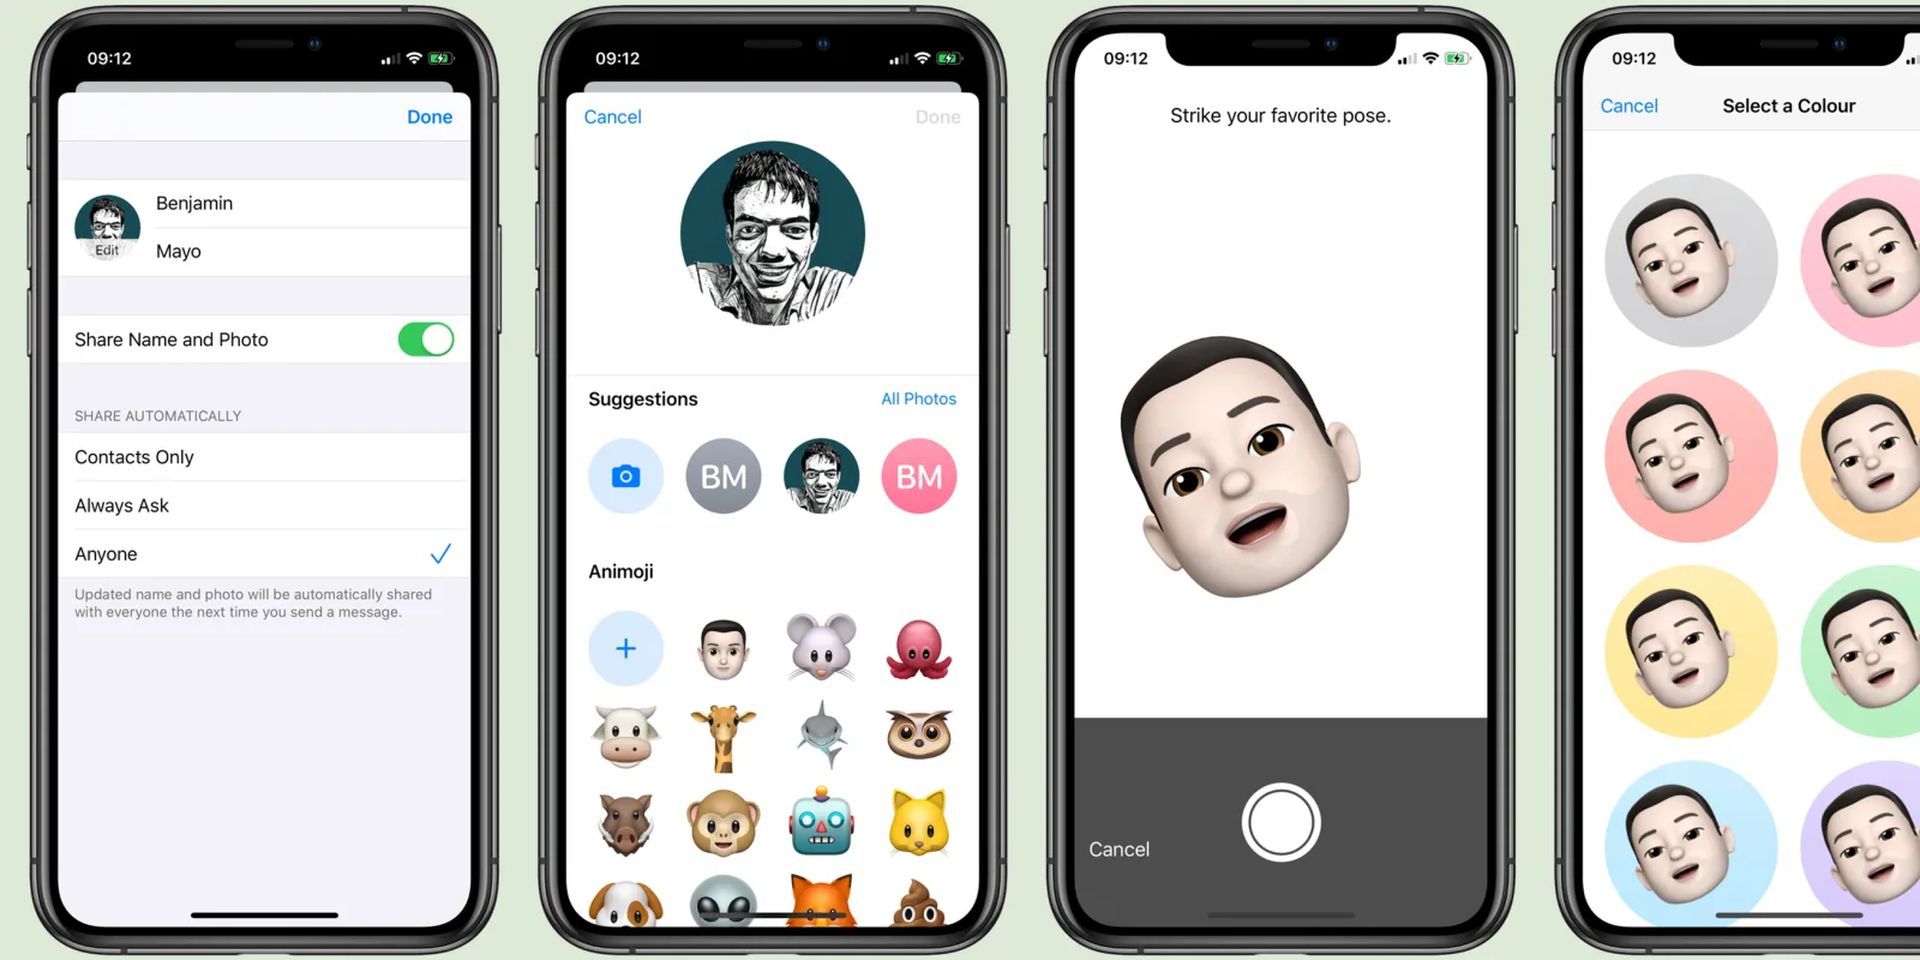 How to change contact photo on iPhone